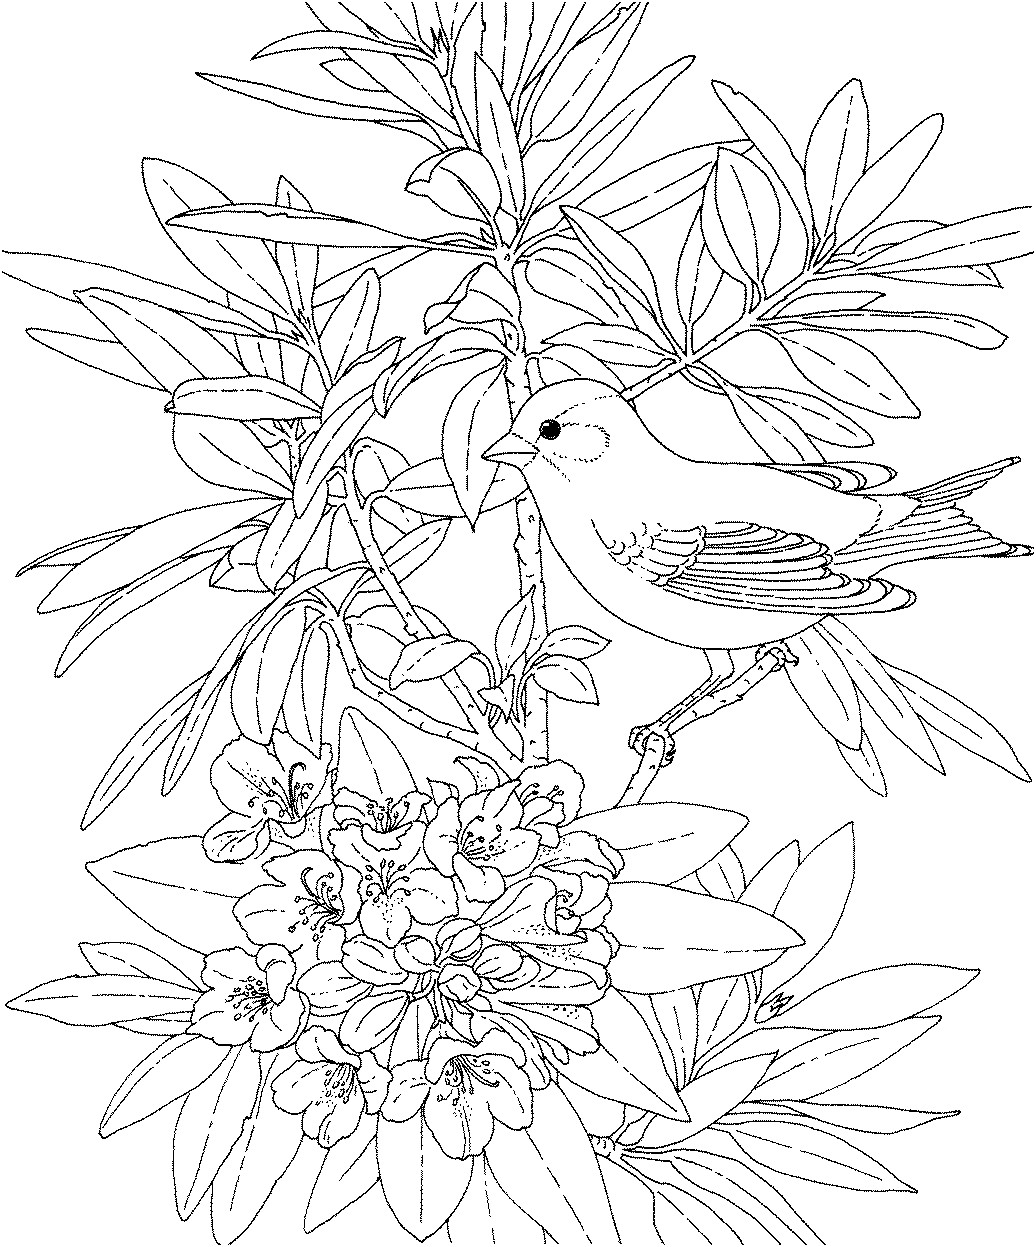 Adult Coloring Pages Birds
 His Heart of passion Little Winter Birds